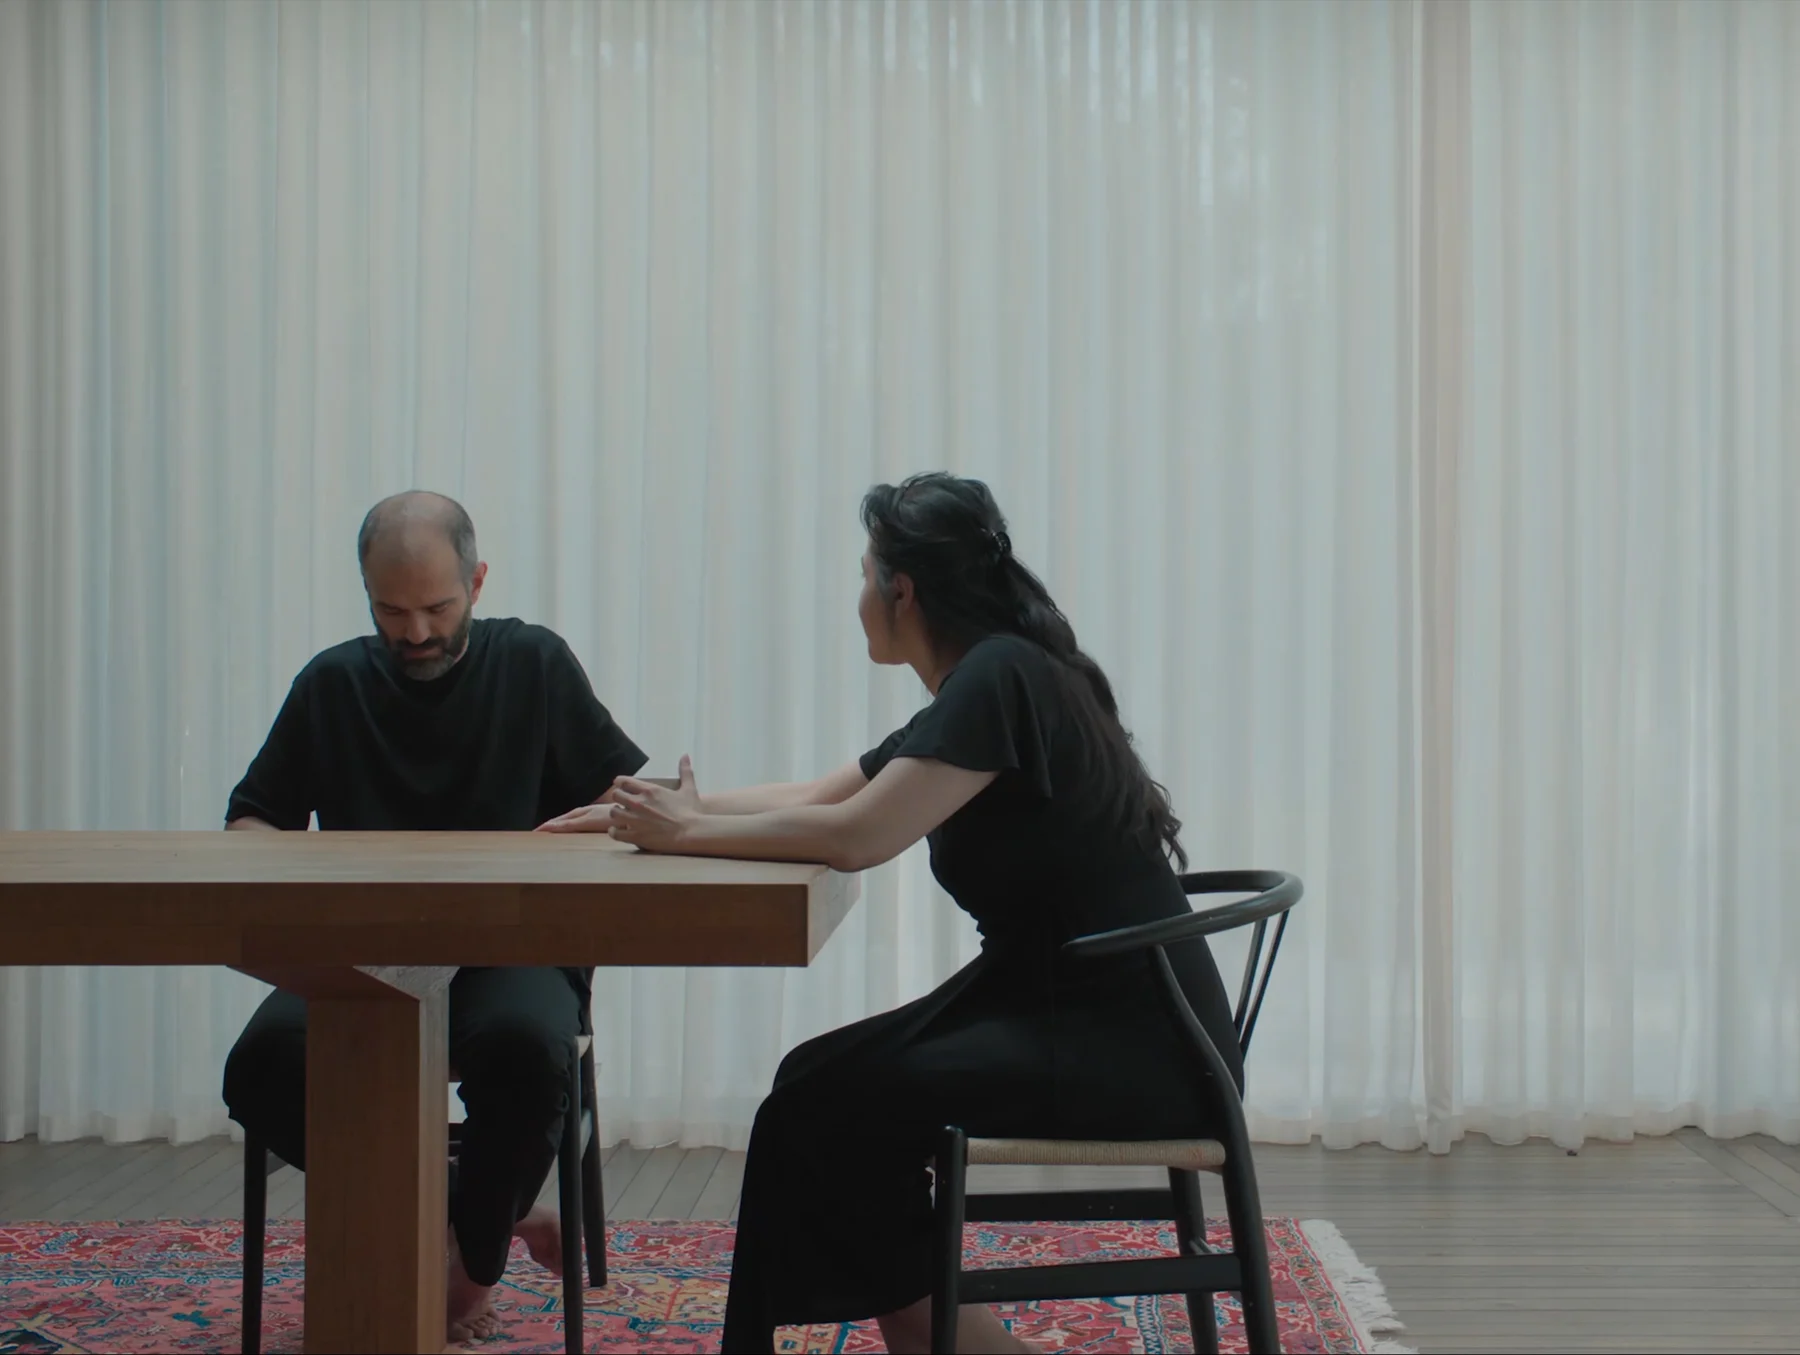 A short clip from Somayeh's film “Skin of Water” showing a man and a woman sitting at a dining table as a blue butterfly flies into shot and lands on the table in front of them.